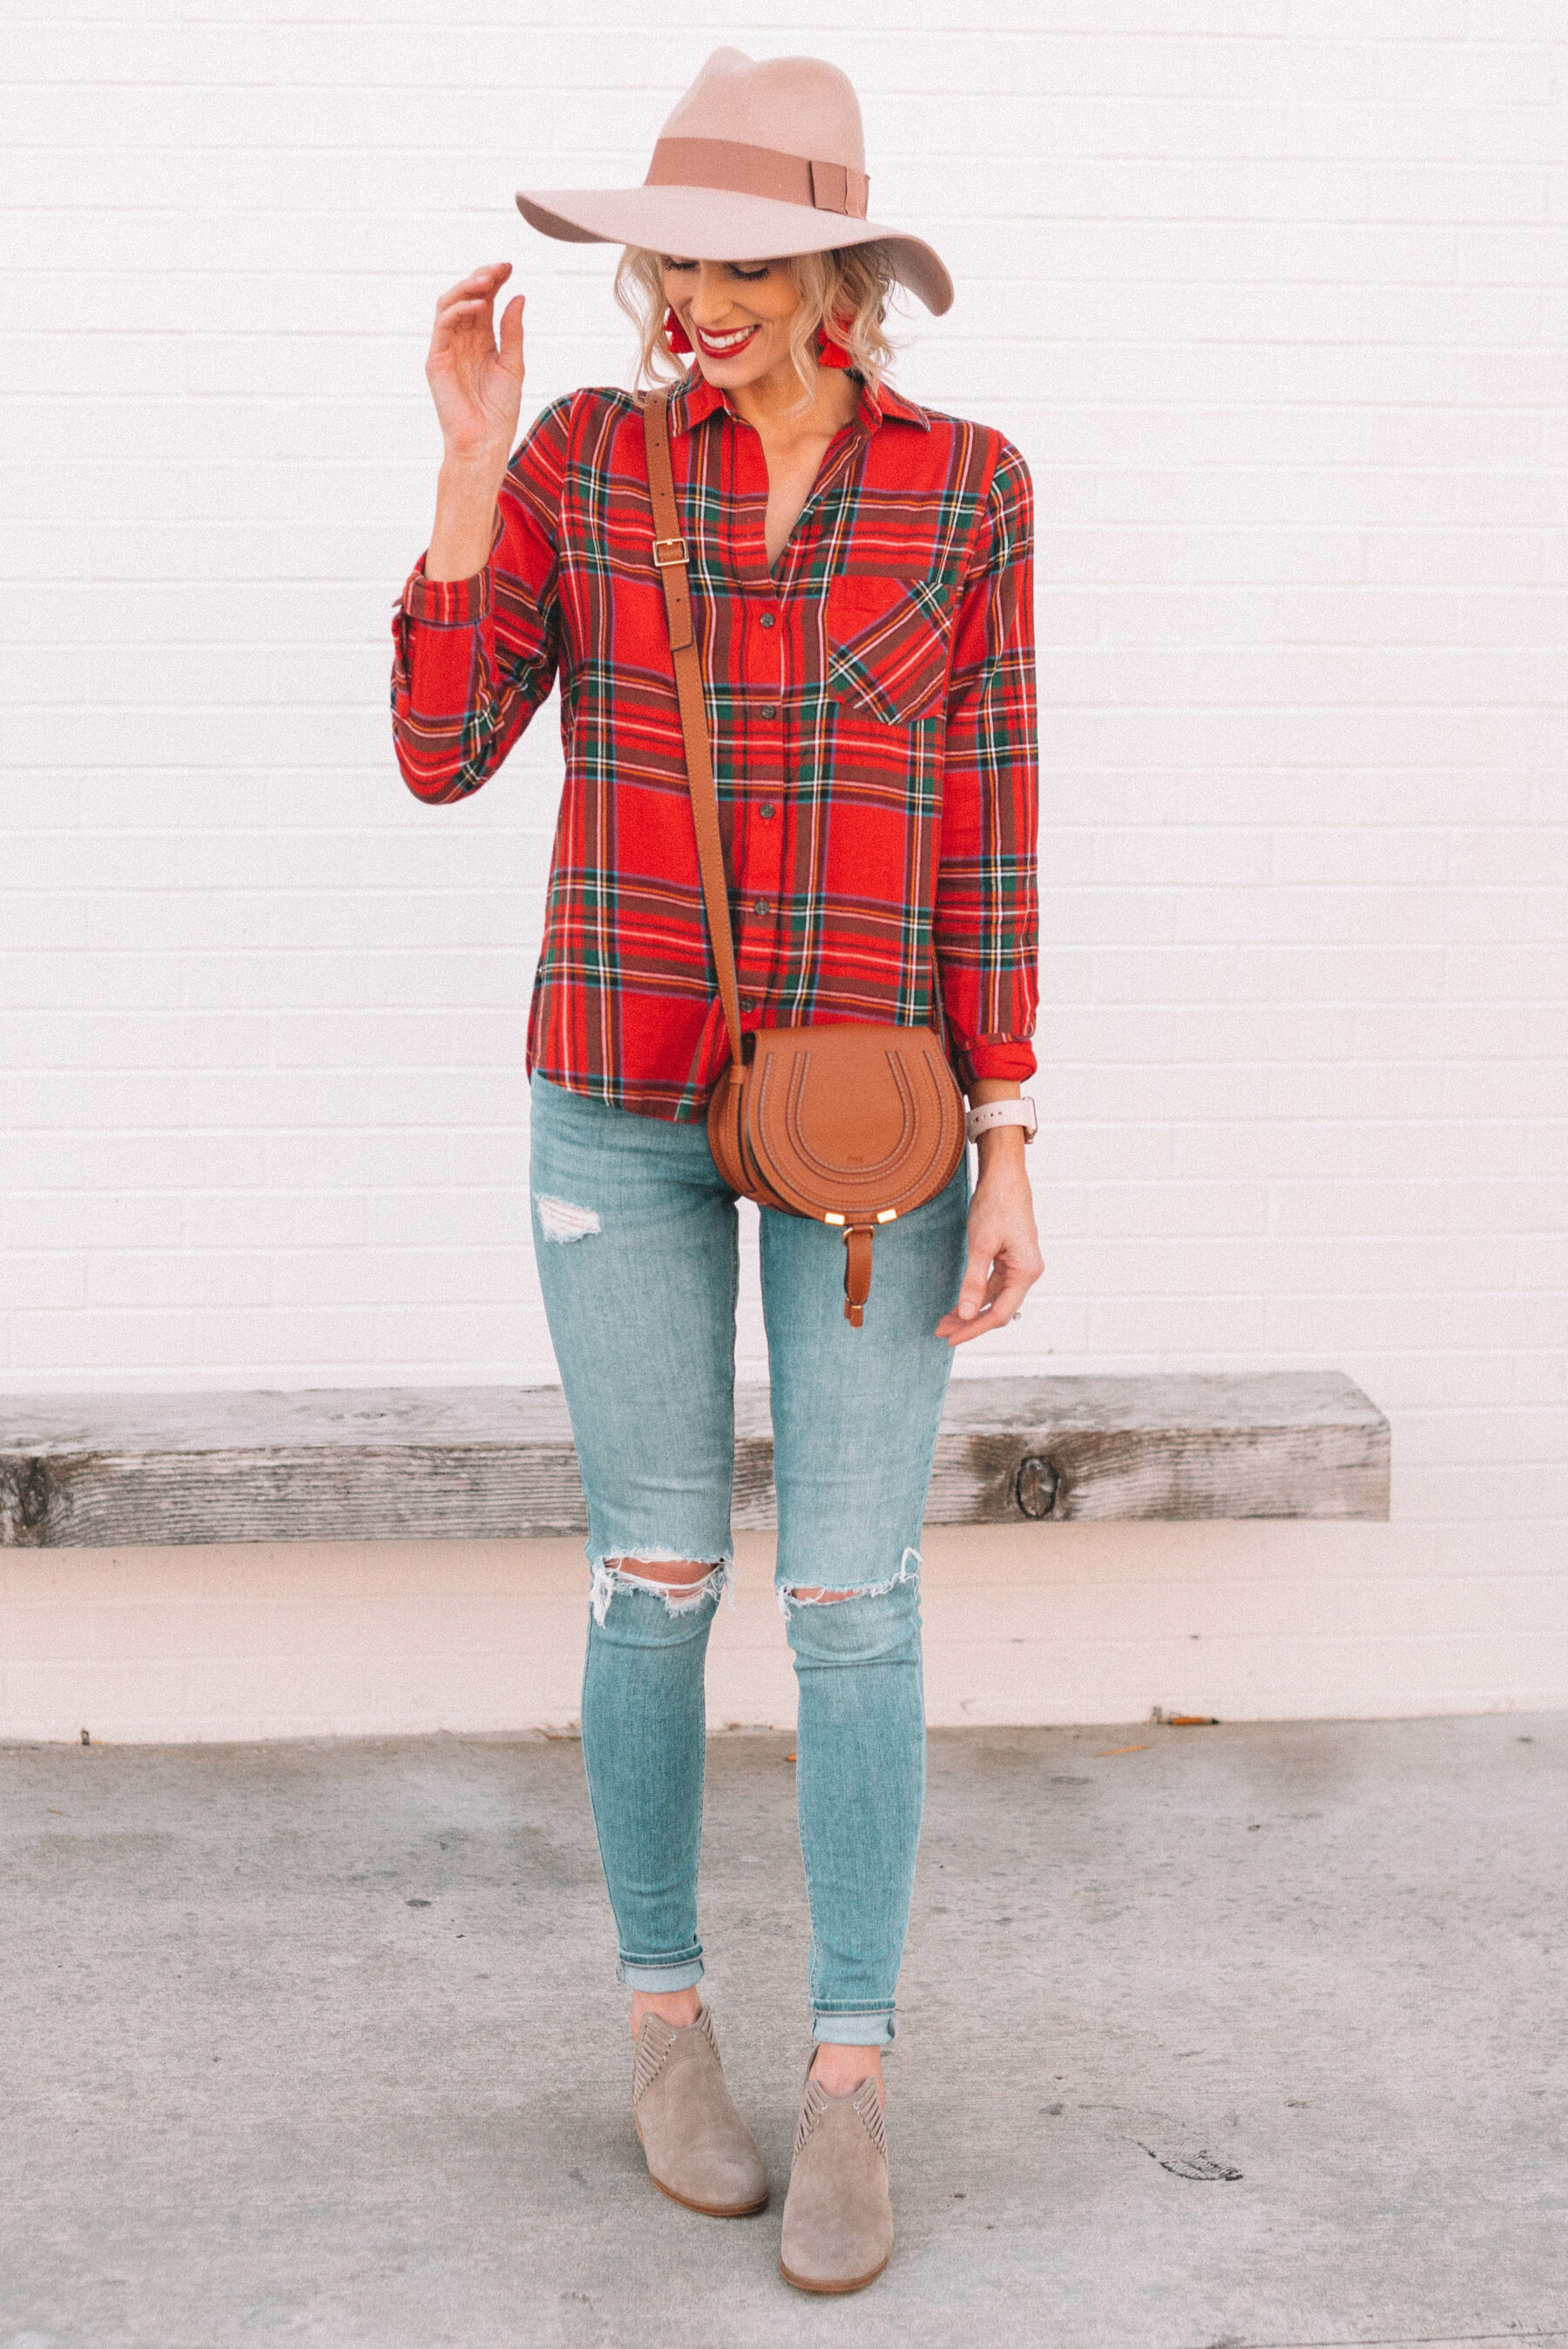 How to Style Flannel Shirts – From Red to Toe